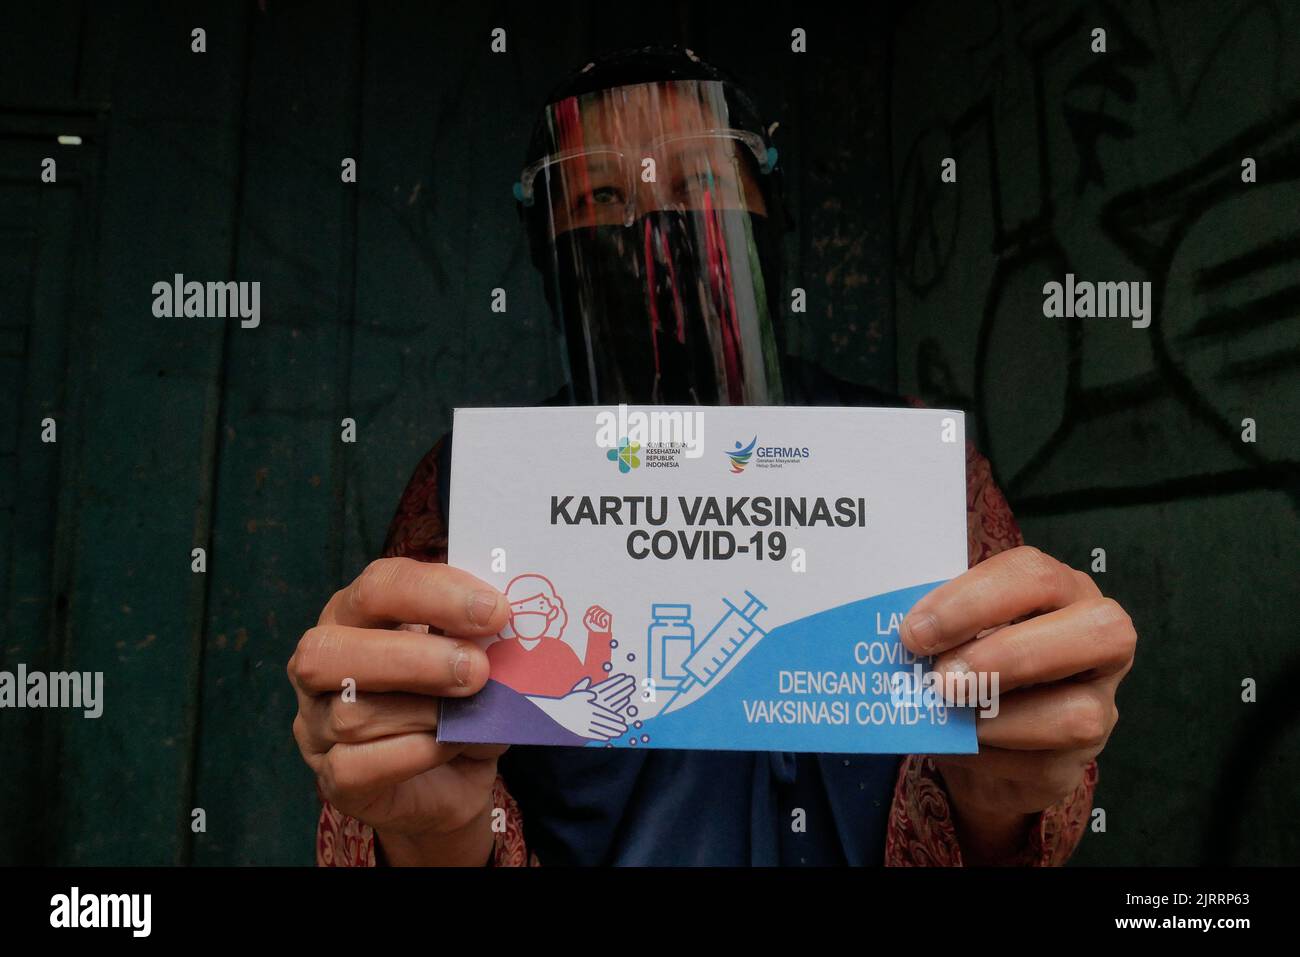 Temanggung, Central Java, Indonesia, Sept 23, 2021: citizen showing vaccine card. Through this method, vaccination participation is expected to increase because it can reach families who do not have access and are afraid to leave the house to avoid transmitting the virus. Stock Photo